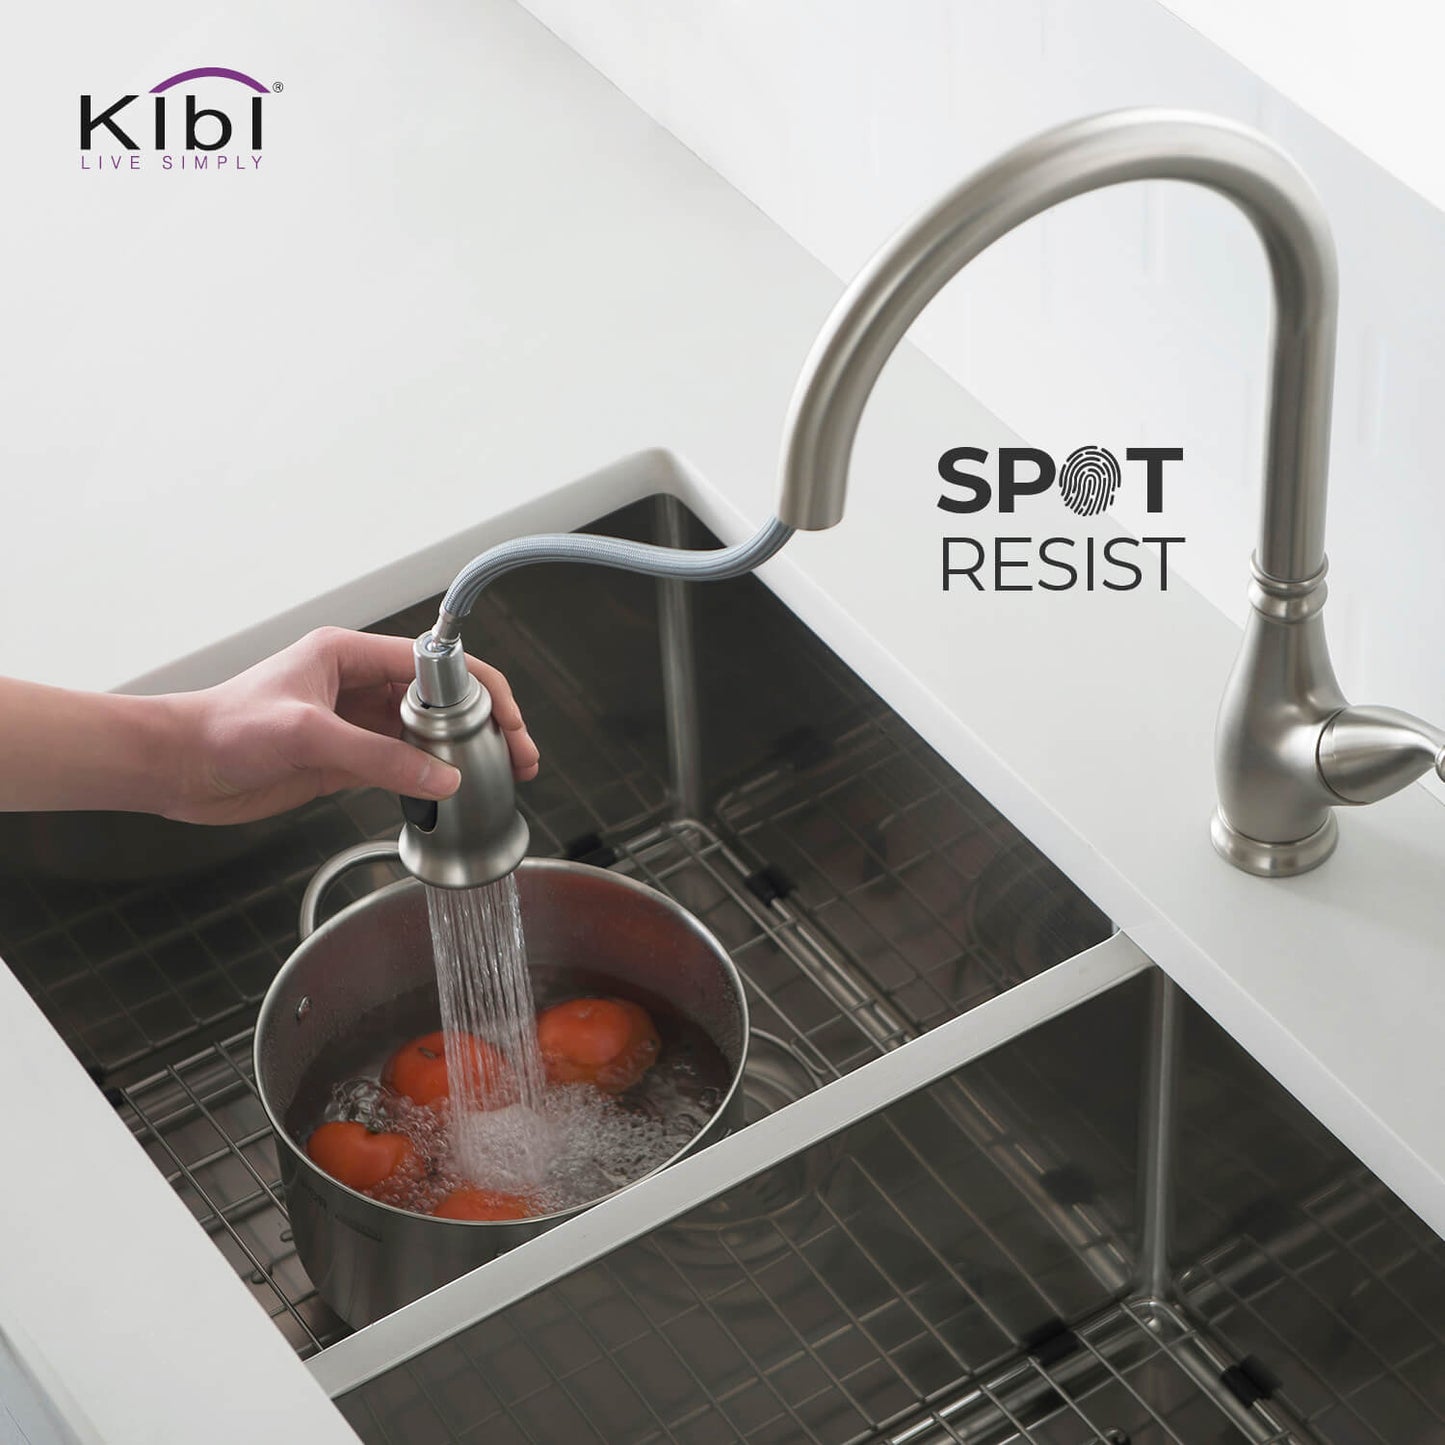 Kibi Summit Single Handle High Arc Pull Down Kitchen Faucet With Soap Dispenser in Brushed Nickel Finish